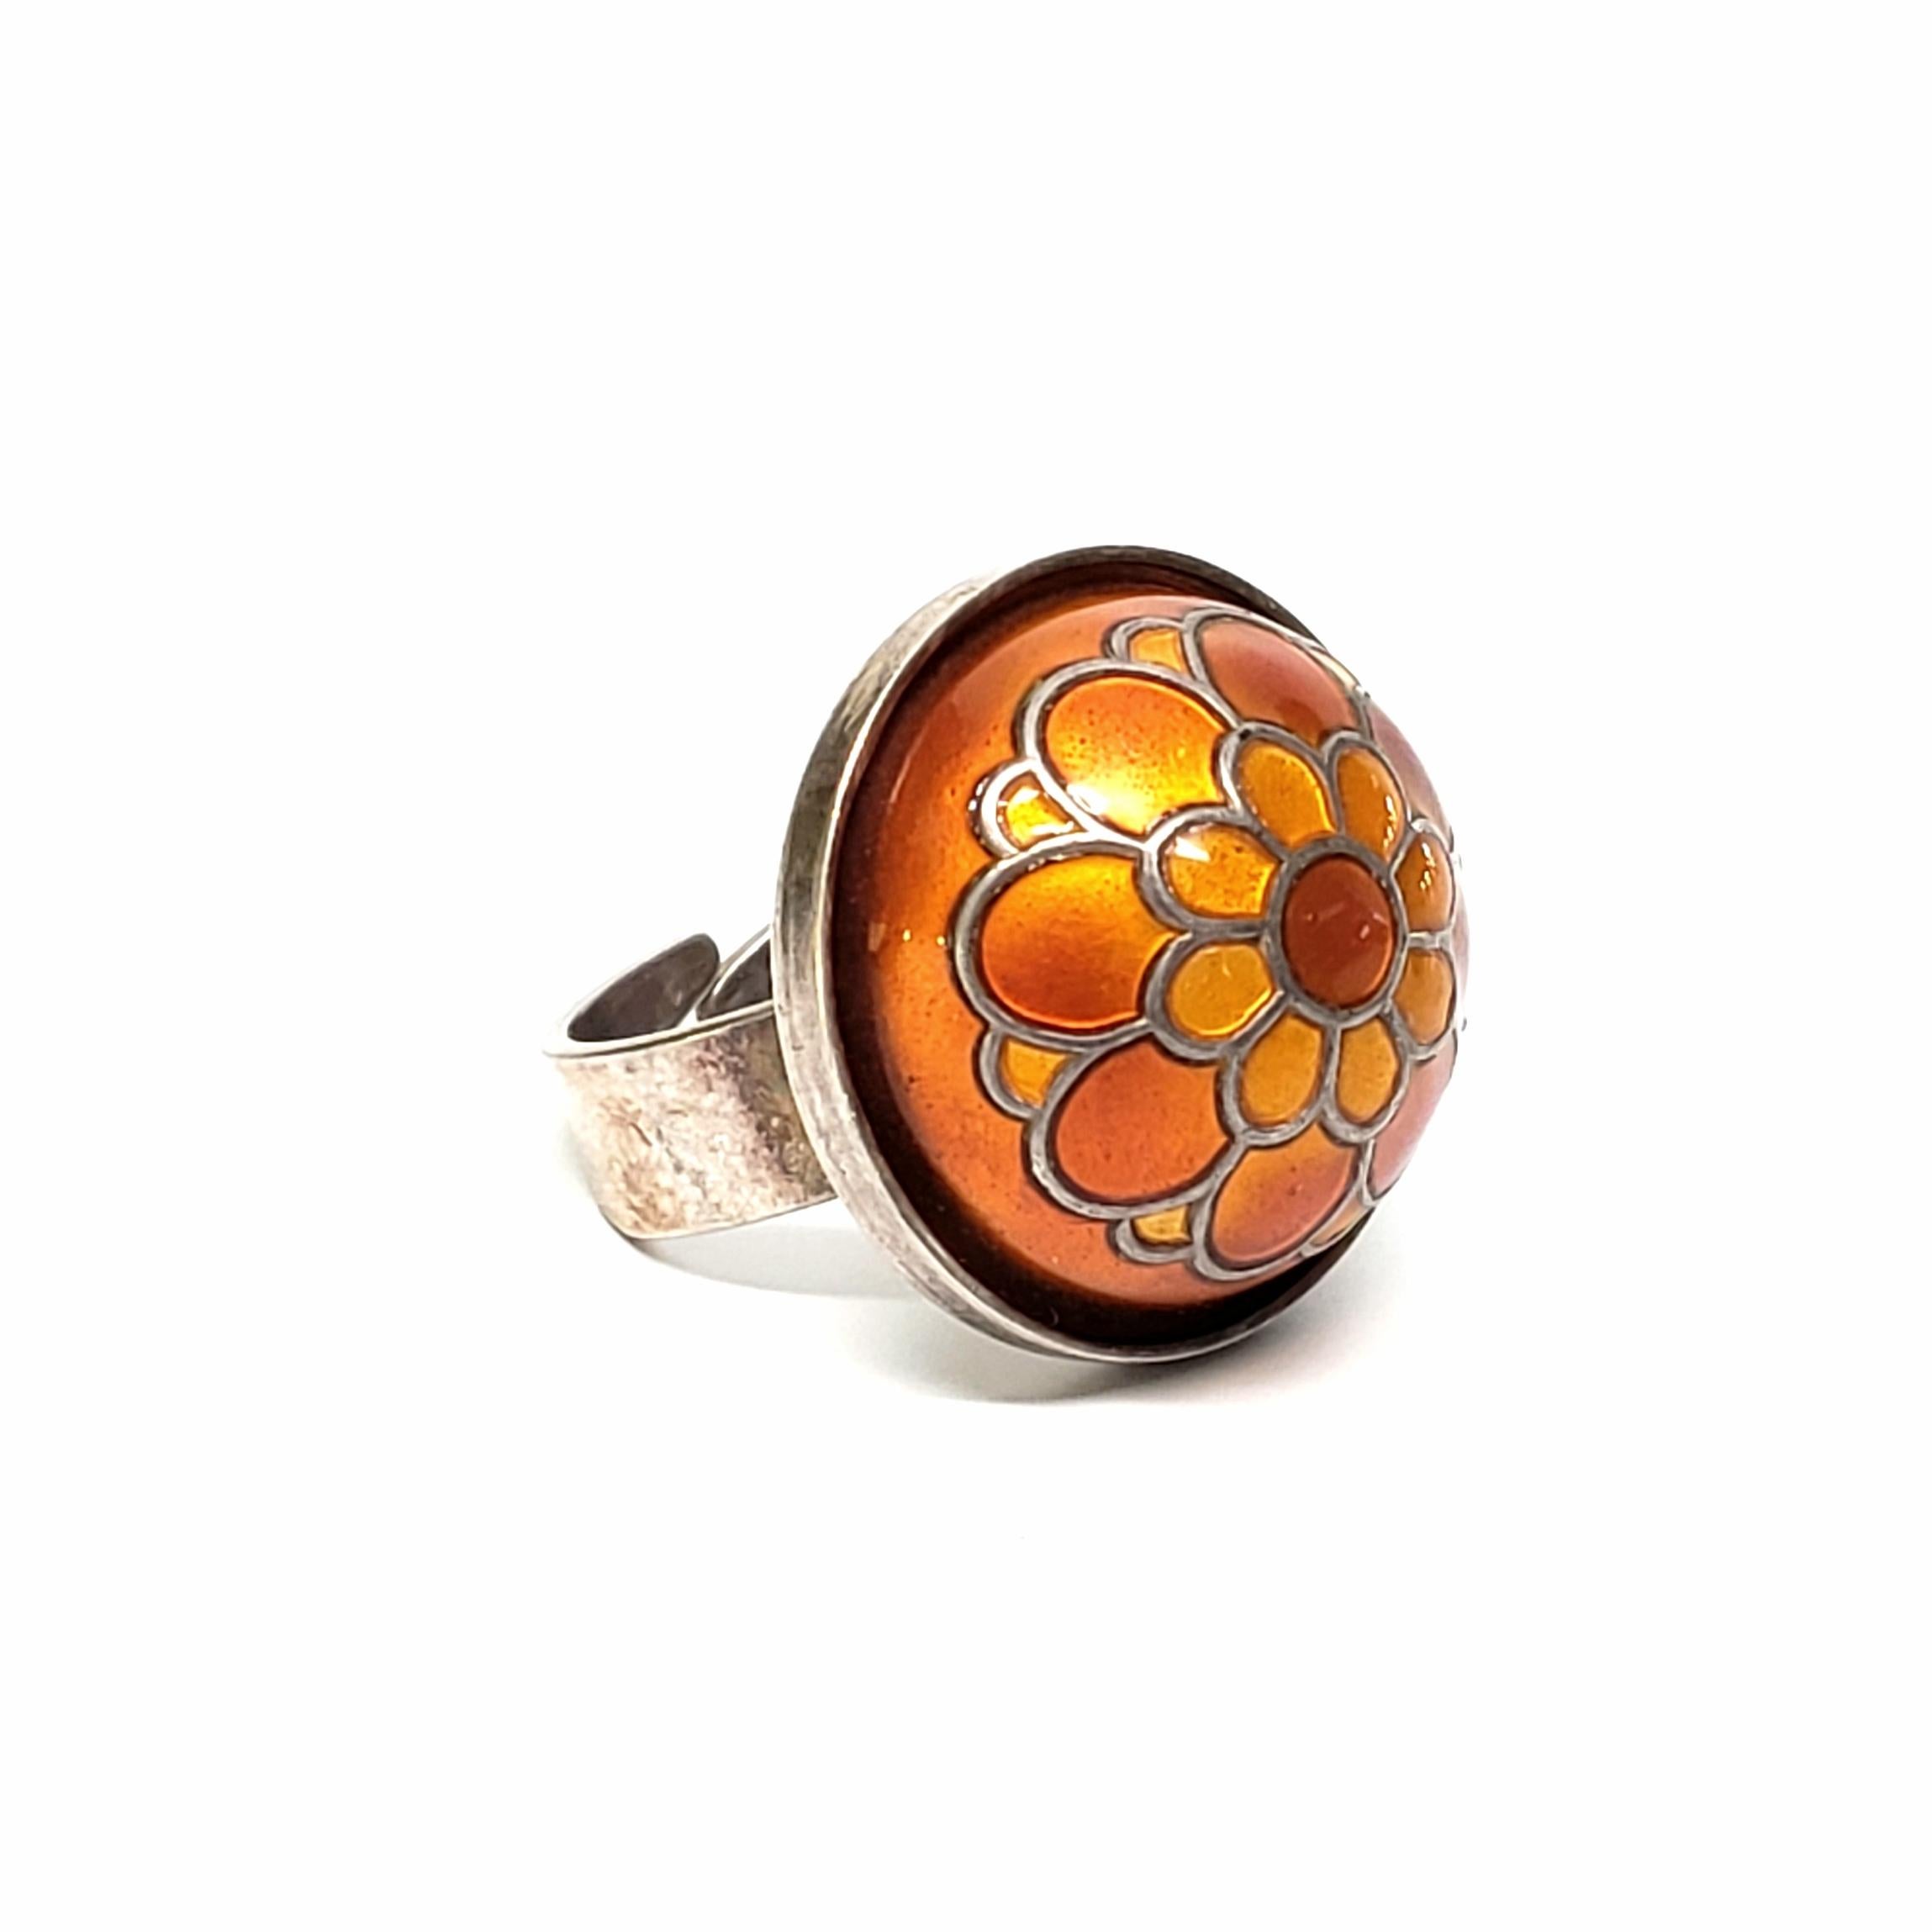 Sterling silver and orange enamel dome ring by David Andersen.

This David Andersen ring features a large orange enamel ring with a floral design. Adjustable size 7.

Dome measures approx 22.8mm (approx 7/8